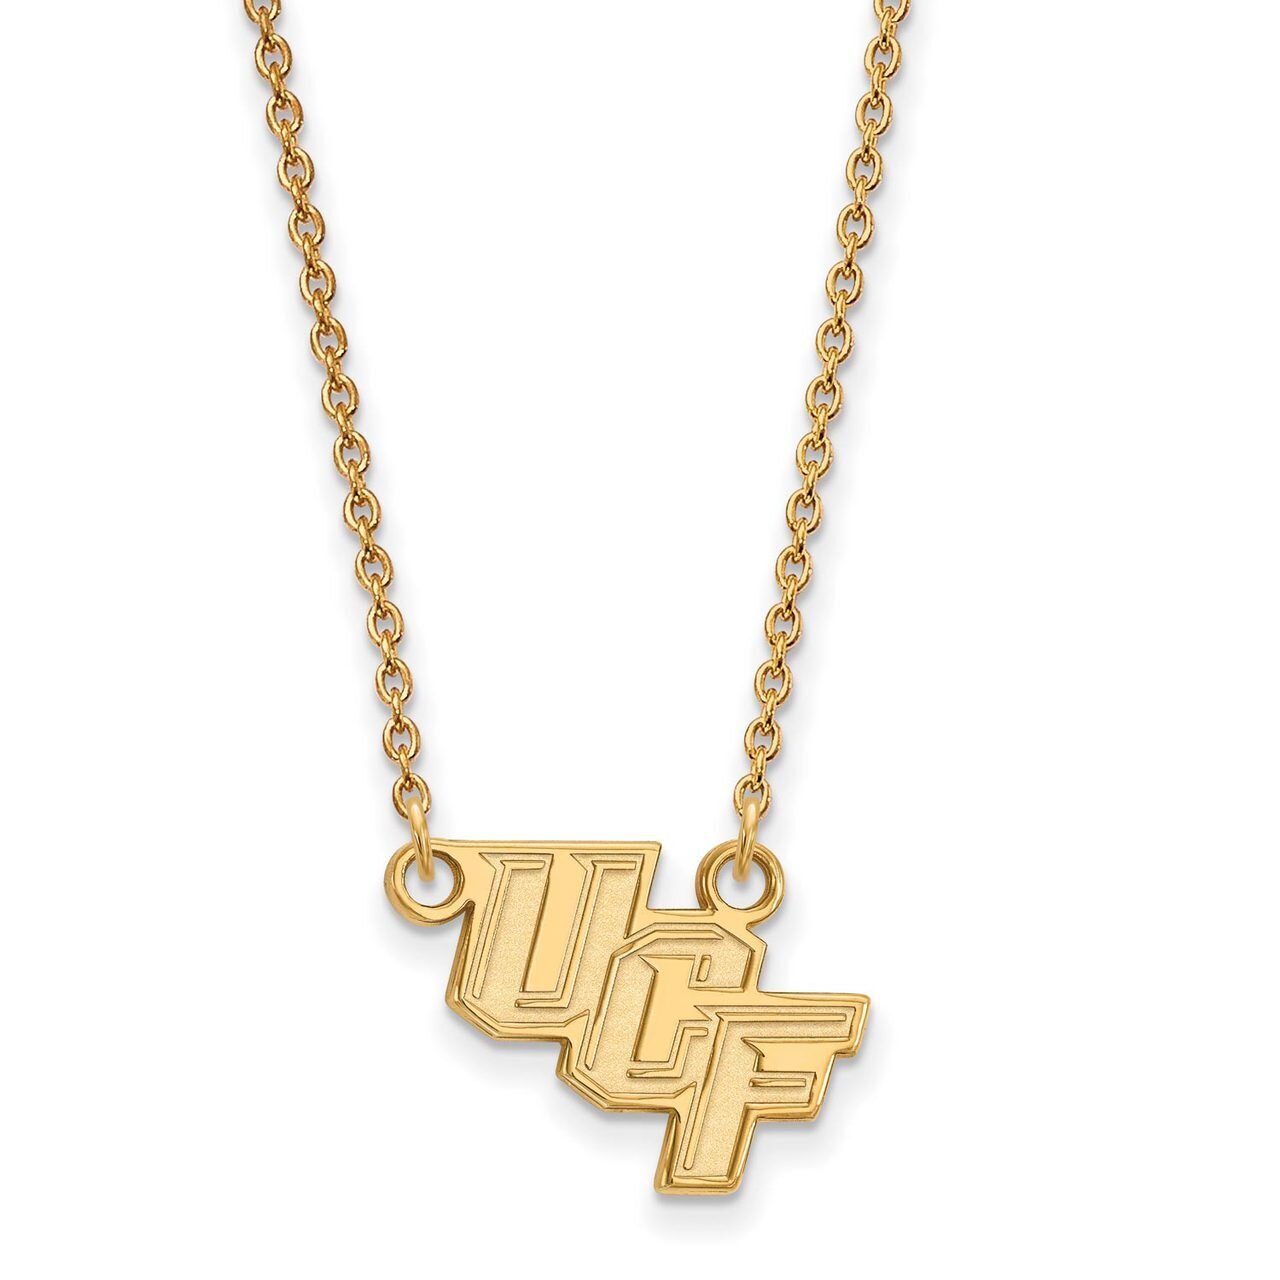 University of Central Florida Small Pendant with Chain Necklace 10k Yellow Gold 1Y011UCF-18